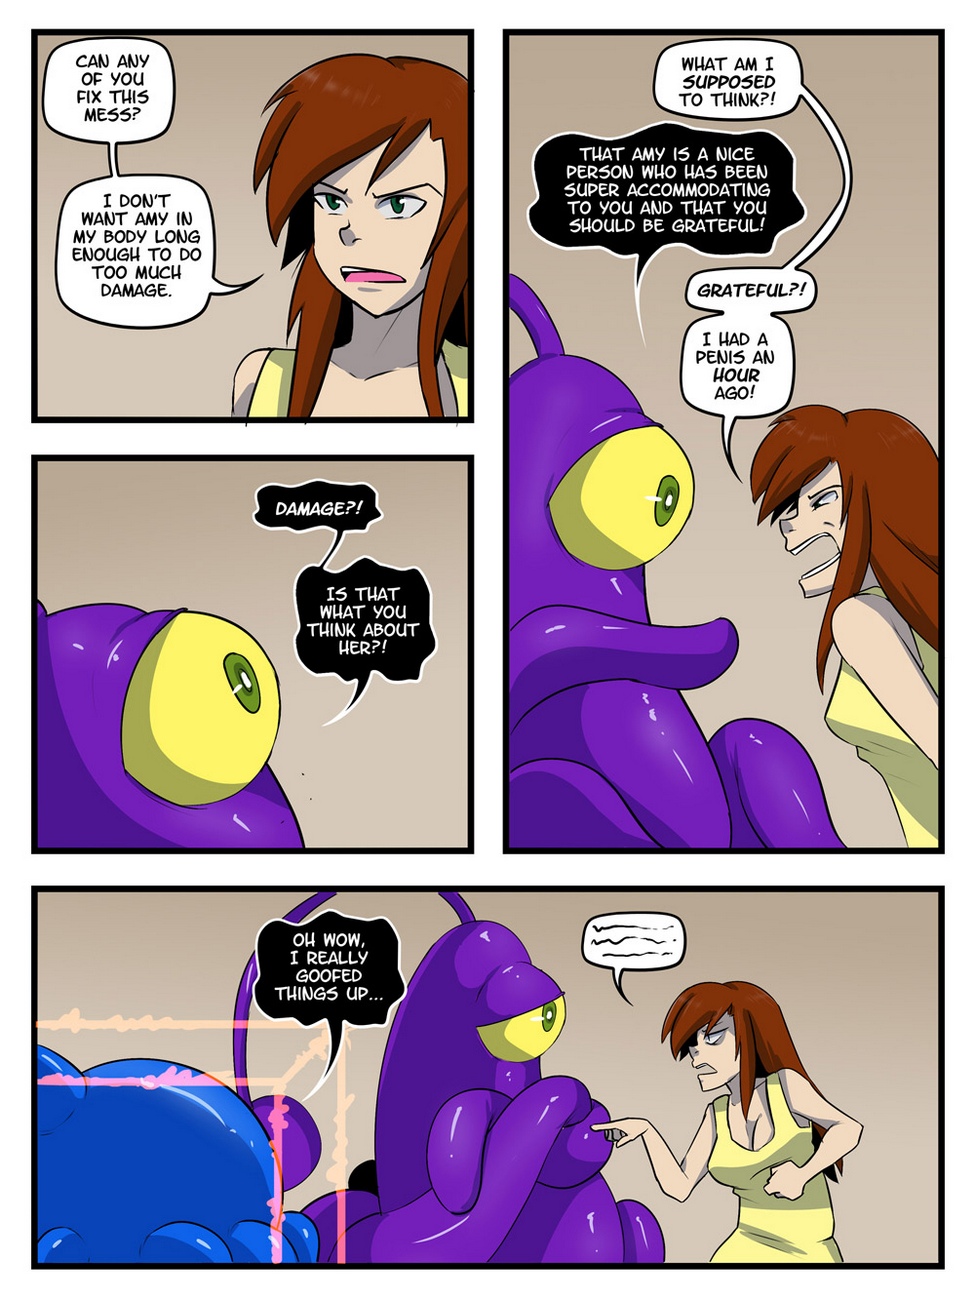 A Date With A Tentacle Monster 11 - part 2